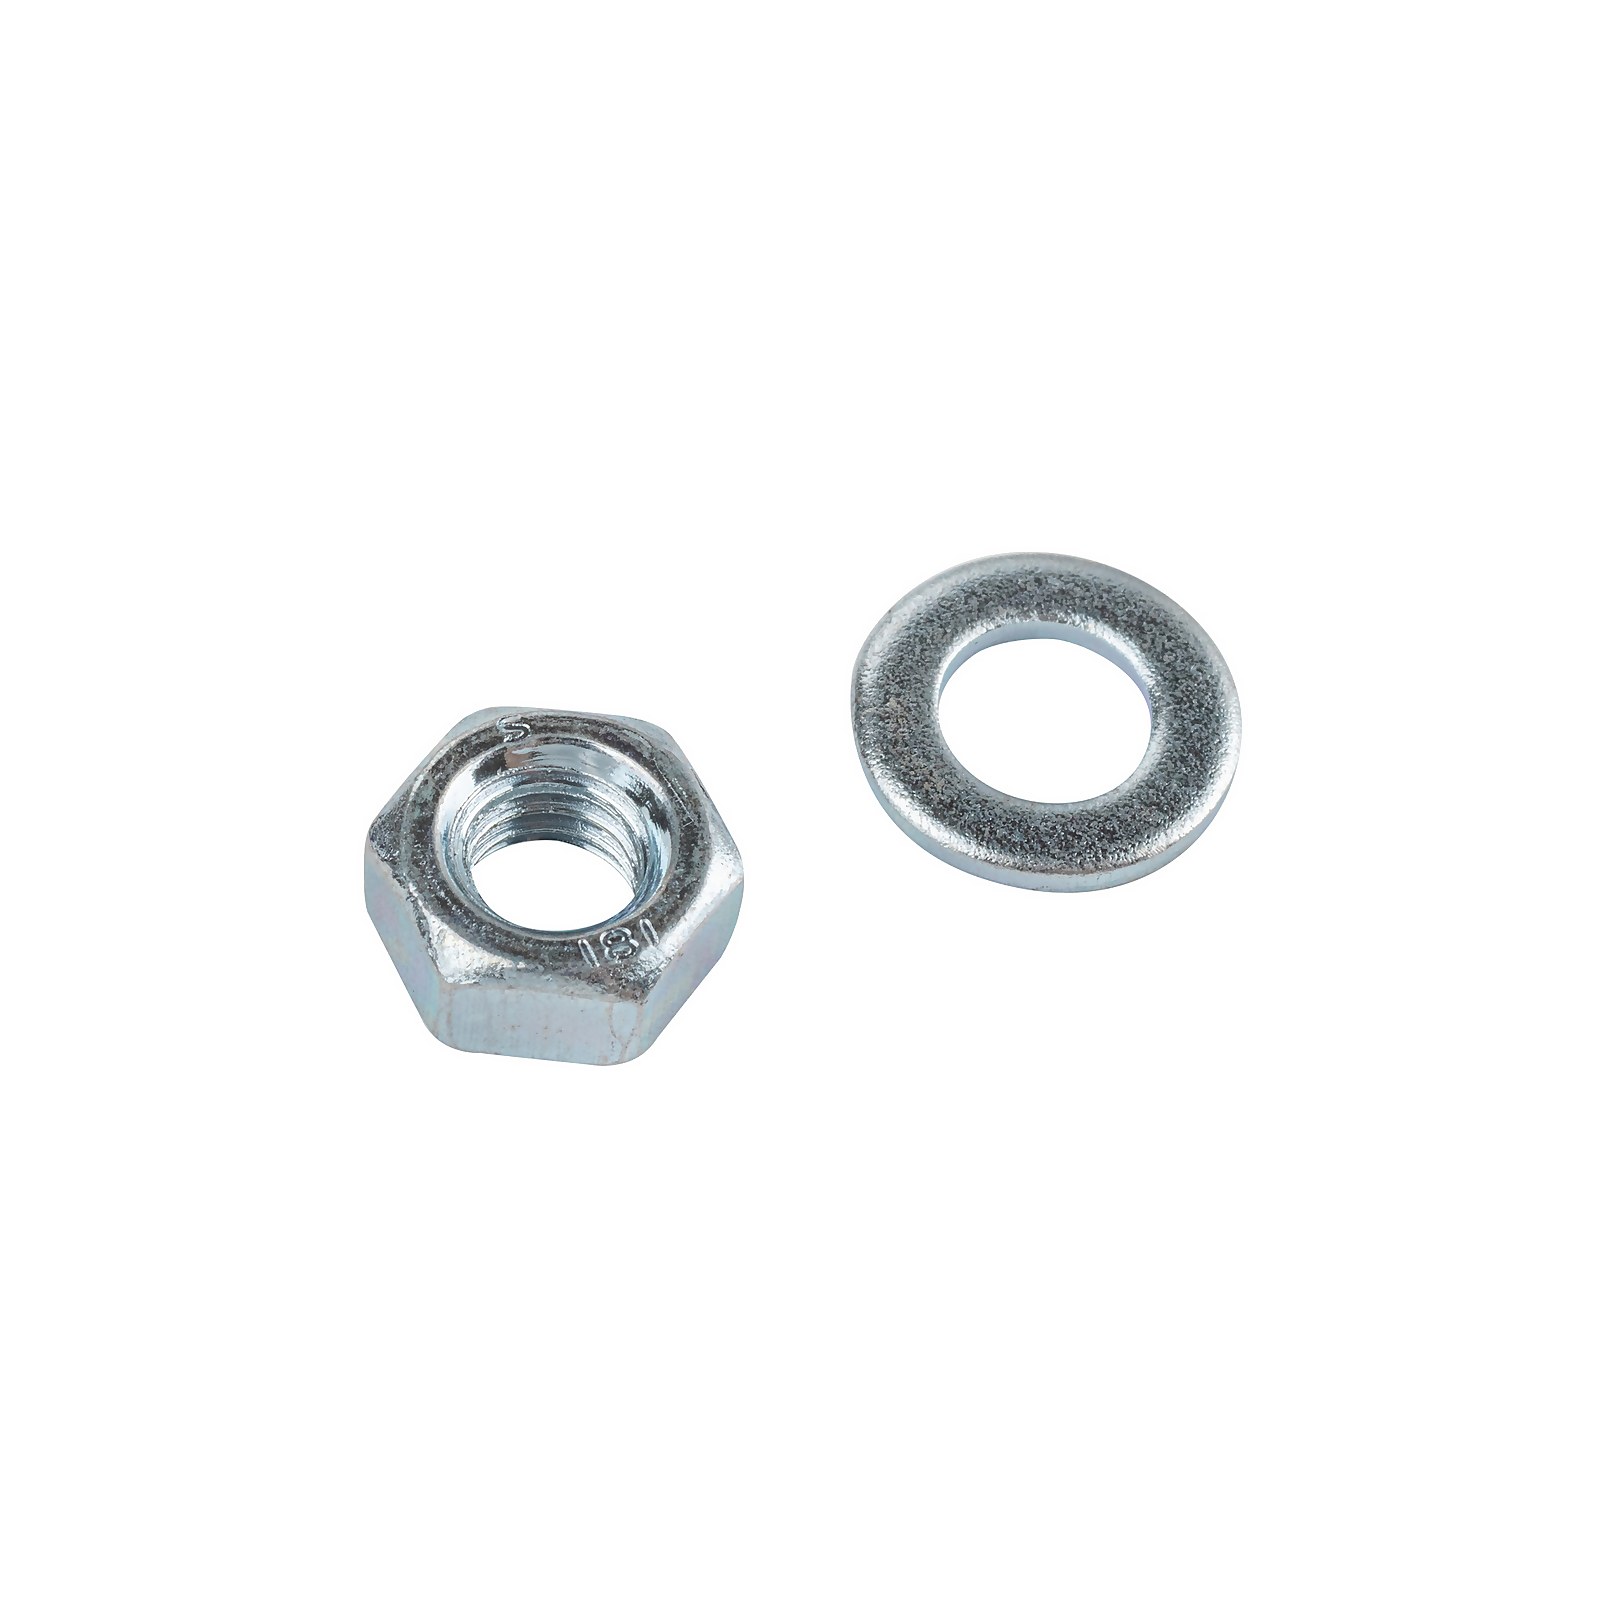 Photo of Homebase Zinc Plated Hex Nut & Washer M12 5 Pack